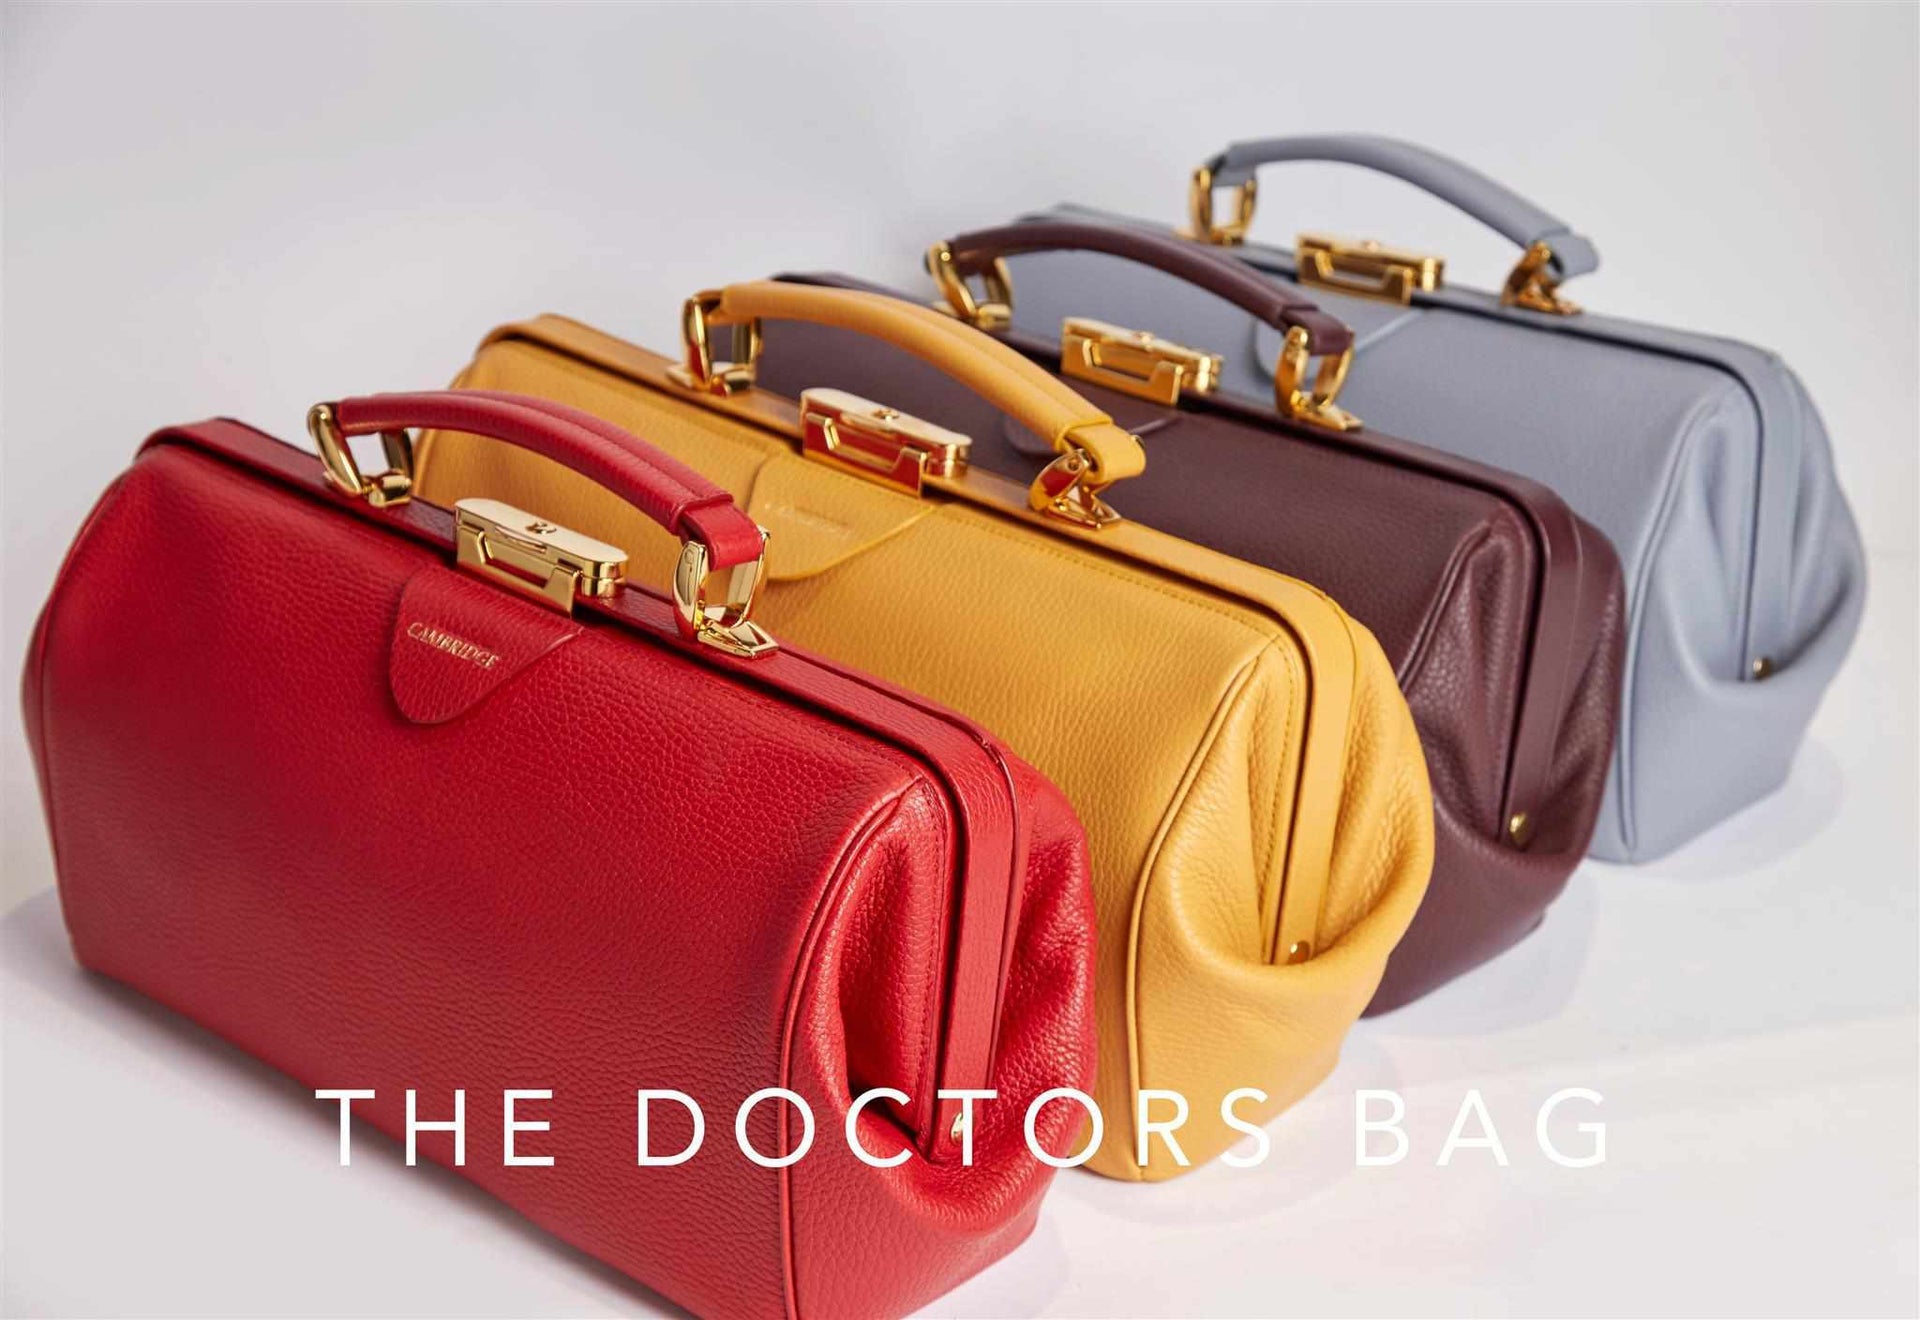 The doctor will see you now … - Cambridge Satchel